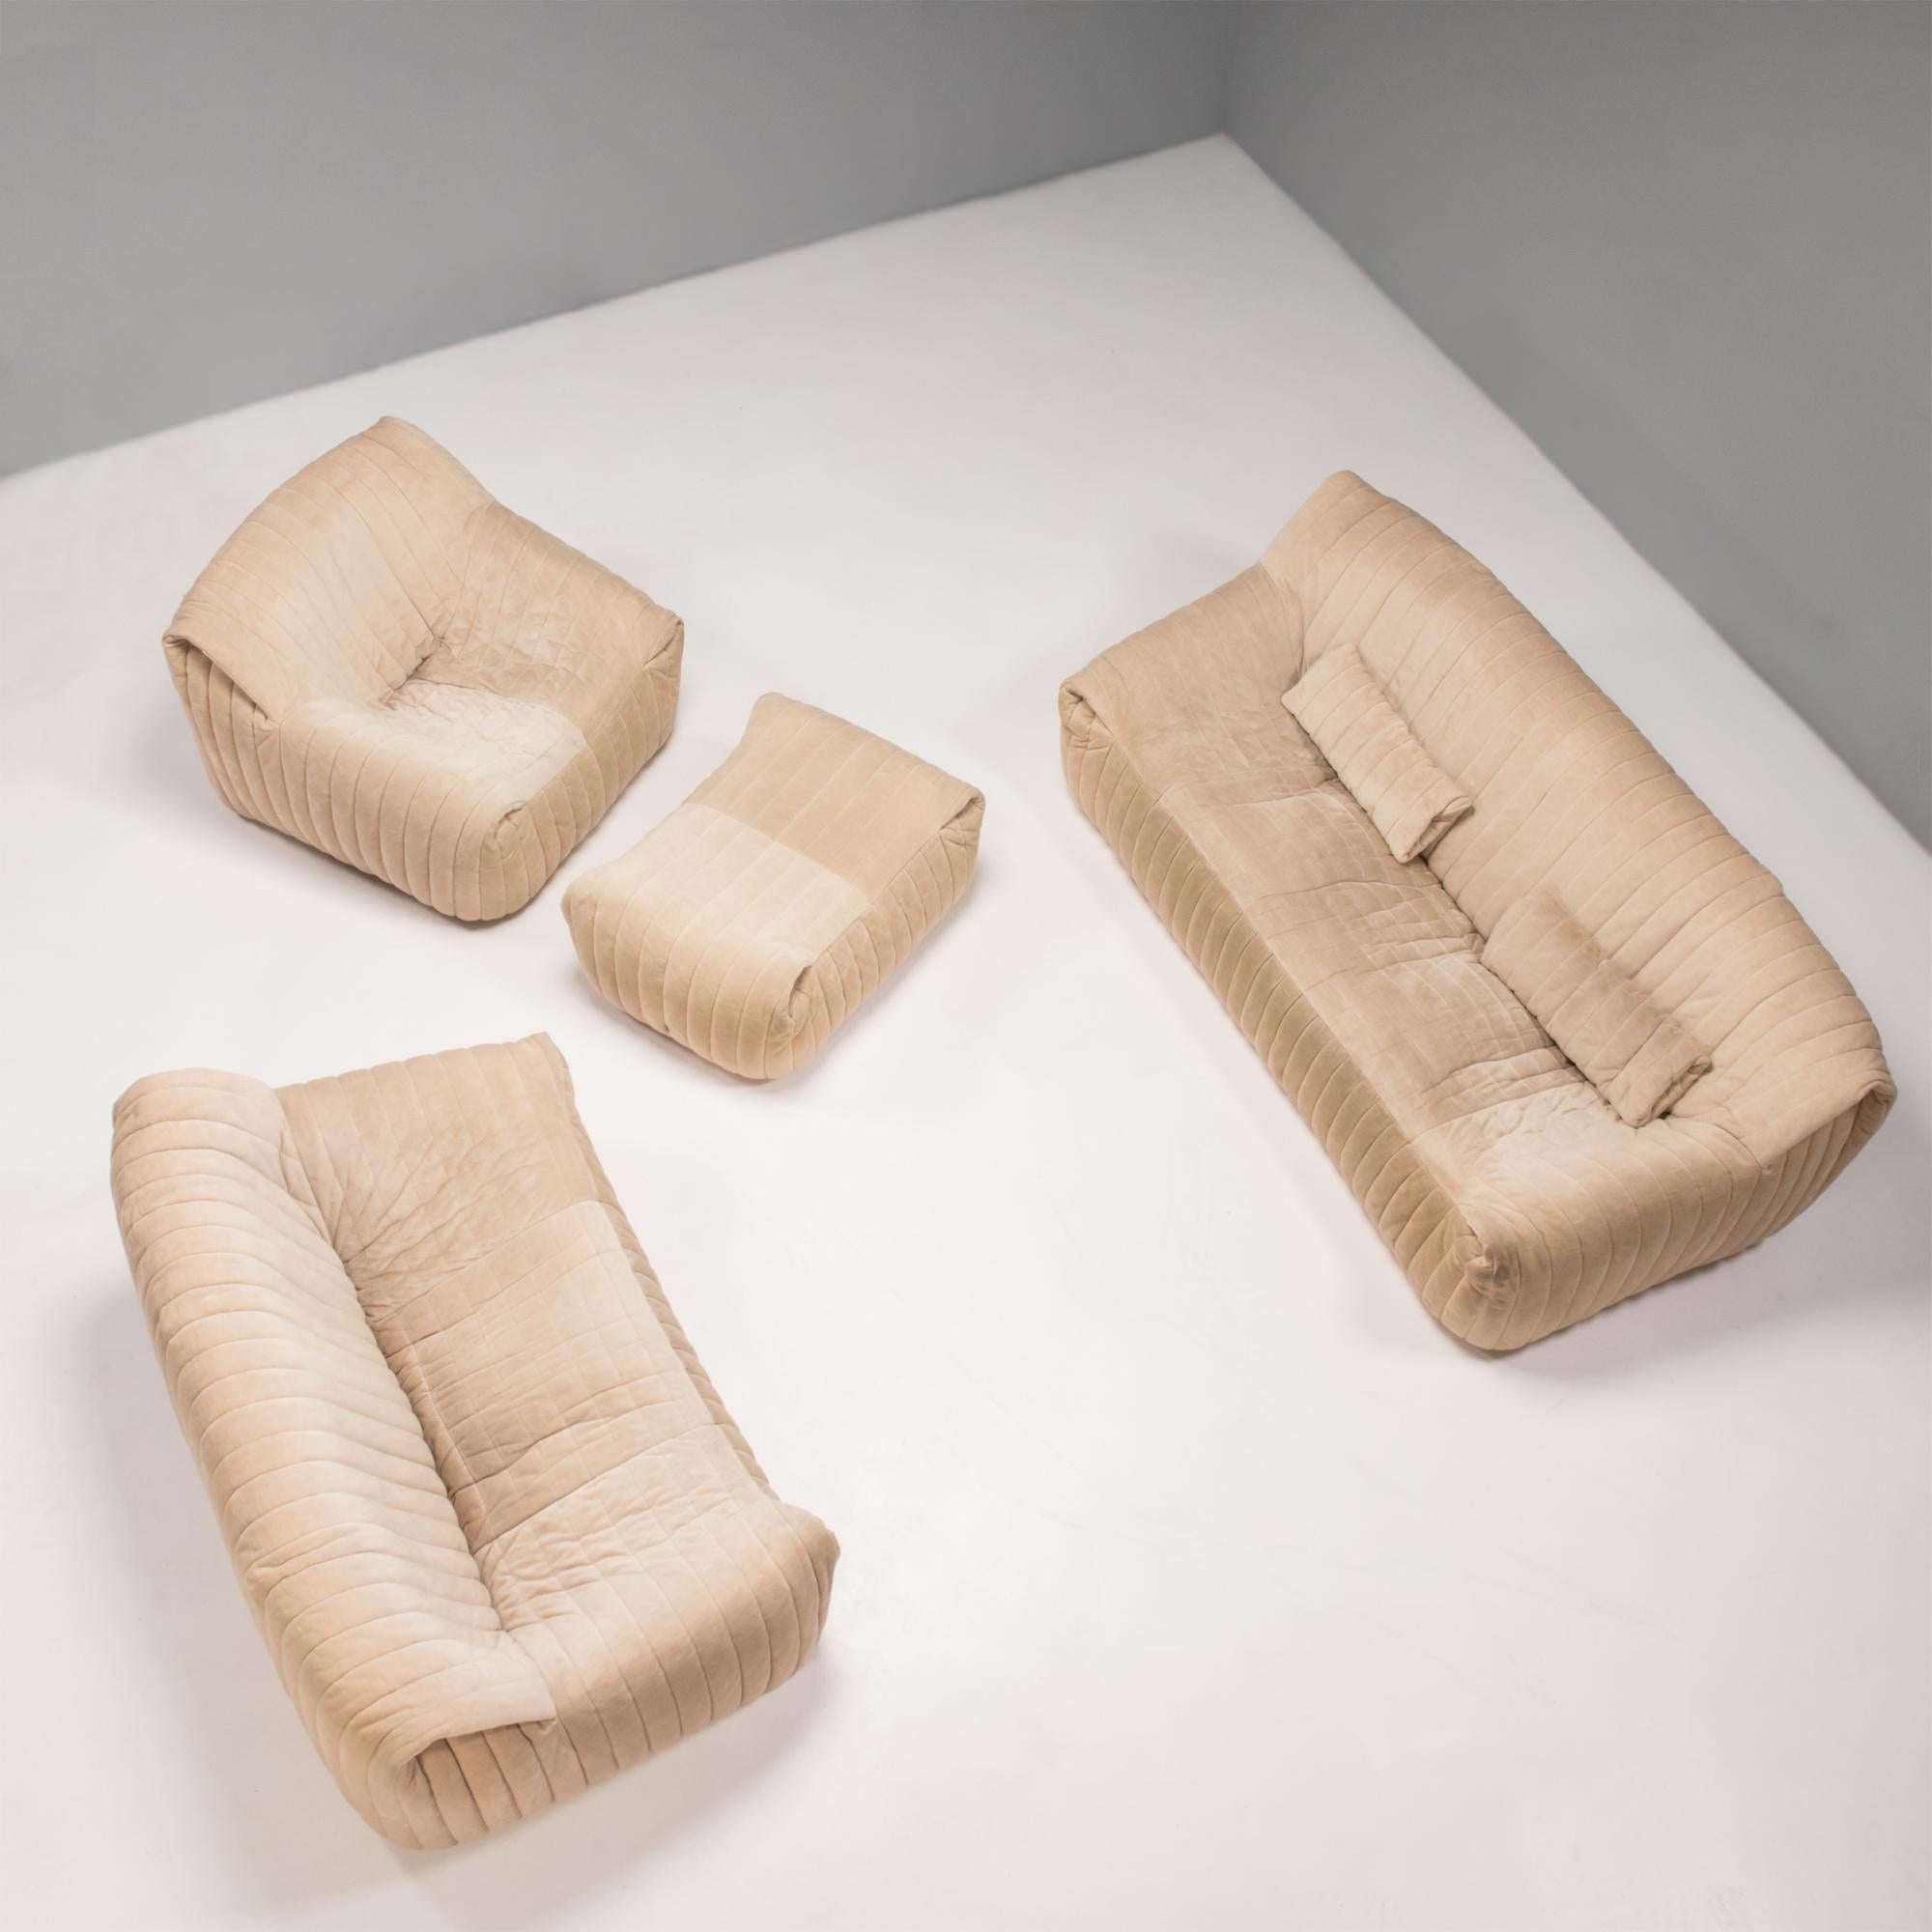 An iconic 1970s design, the Sandra sofa collection was designed by Annie Hiéronimus for Cinna after she joined the Roset Bureau d'Etudes in 1976.

Constructed from foam, all the pieces have a solid form which is fully upholstered in biscuit beige